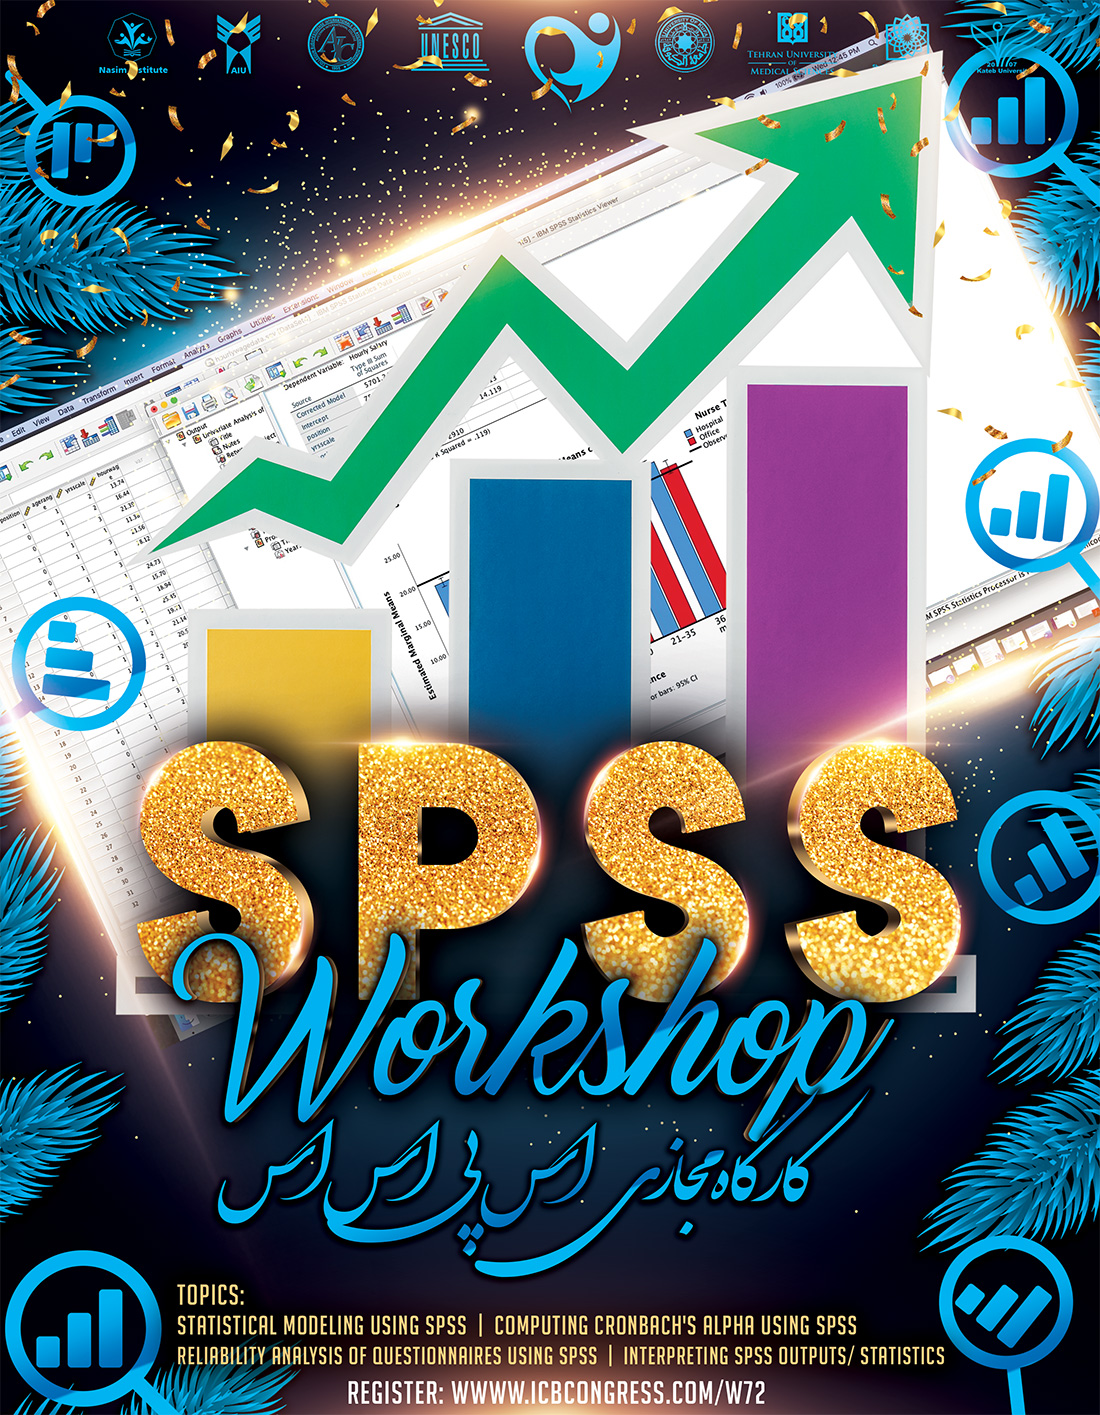 SPSS Workshops (Primary)